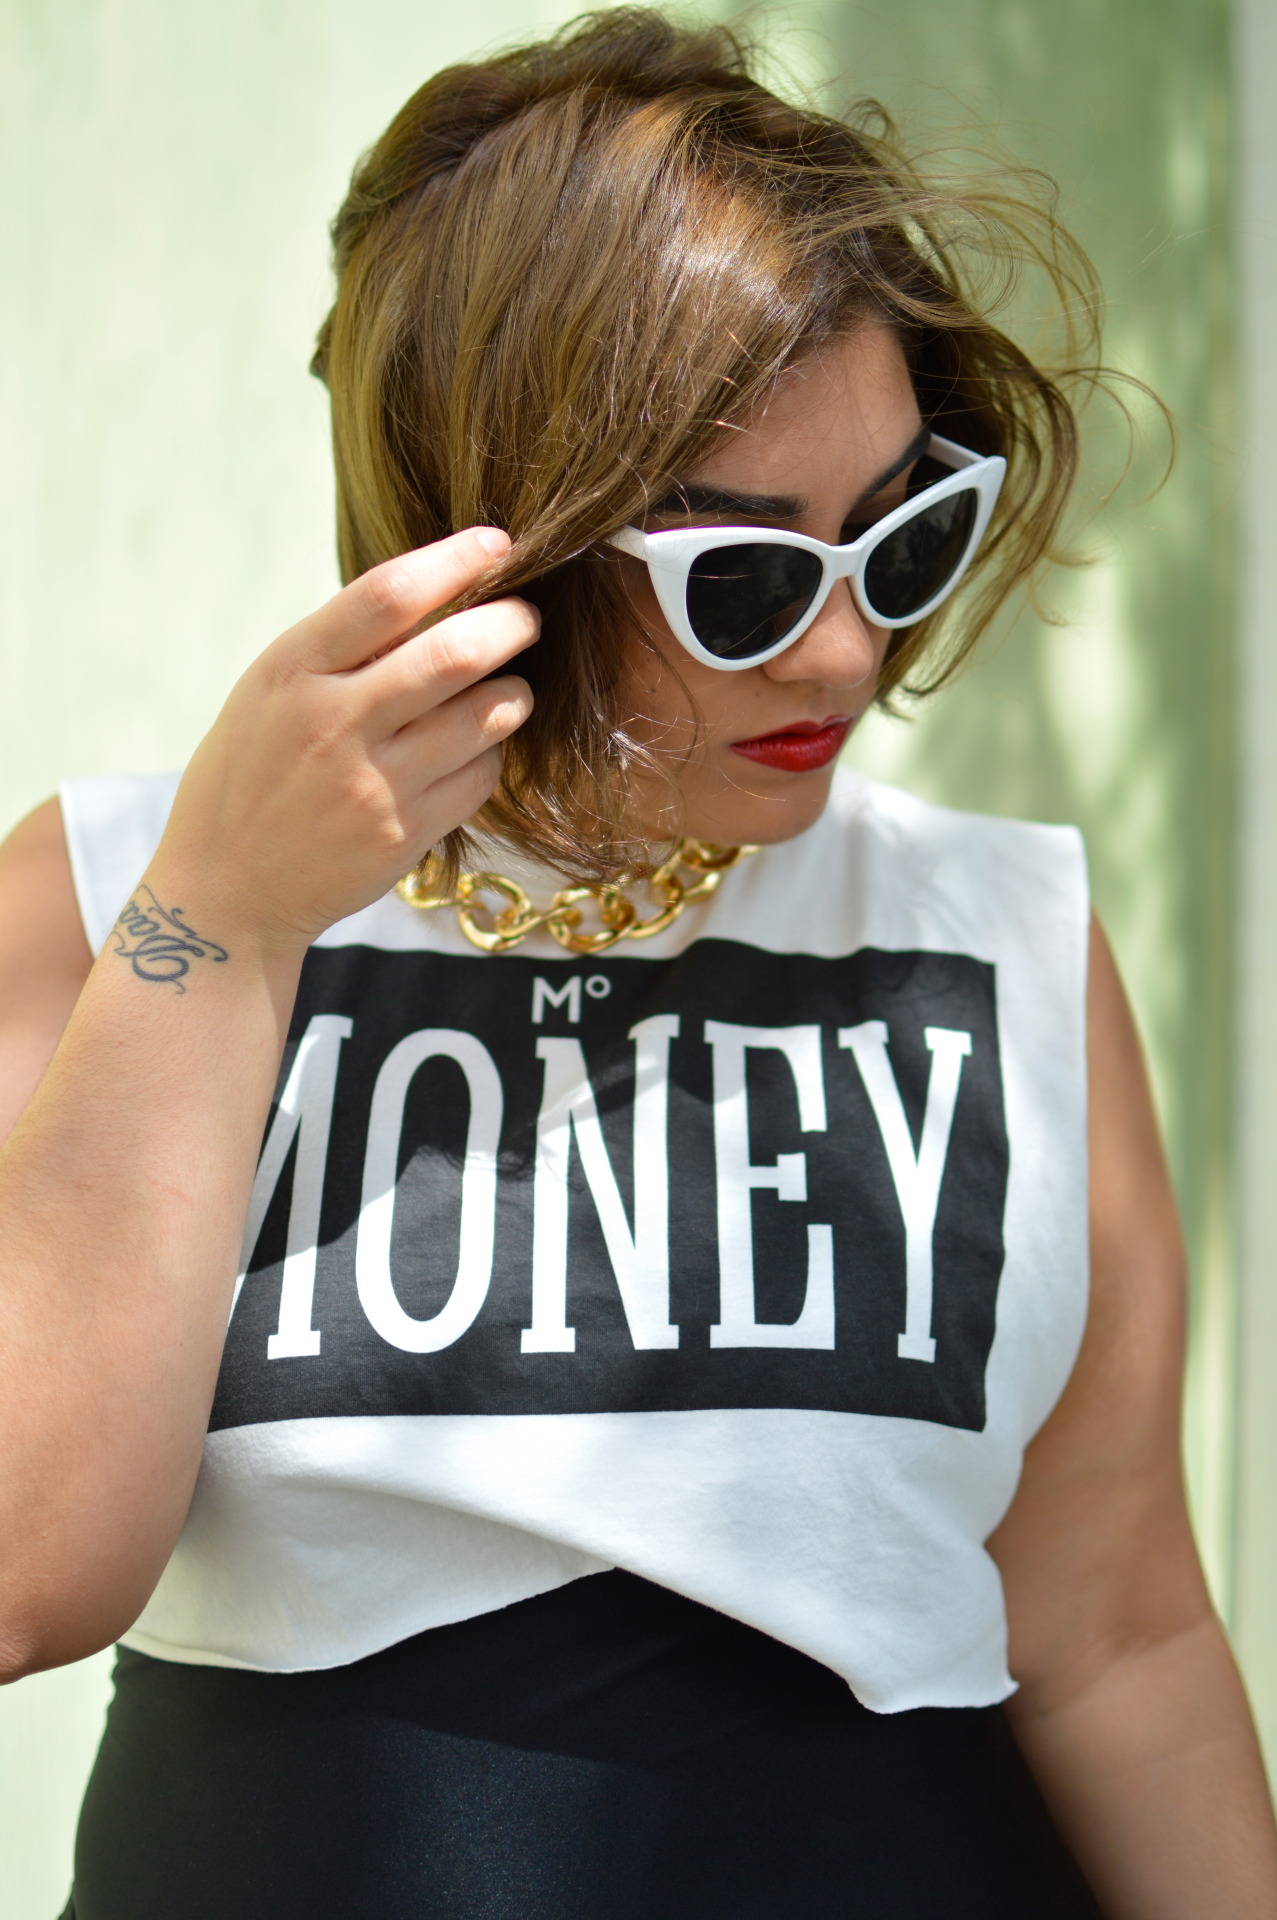 justabebopbaby:  mandyoh:  nadiaaboulhosn:  Nadia Aboulhosn. Time is Money. Dress: